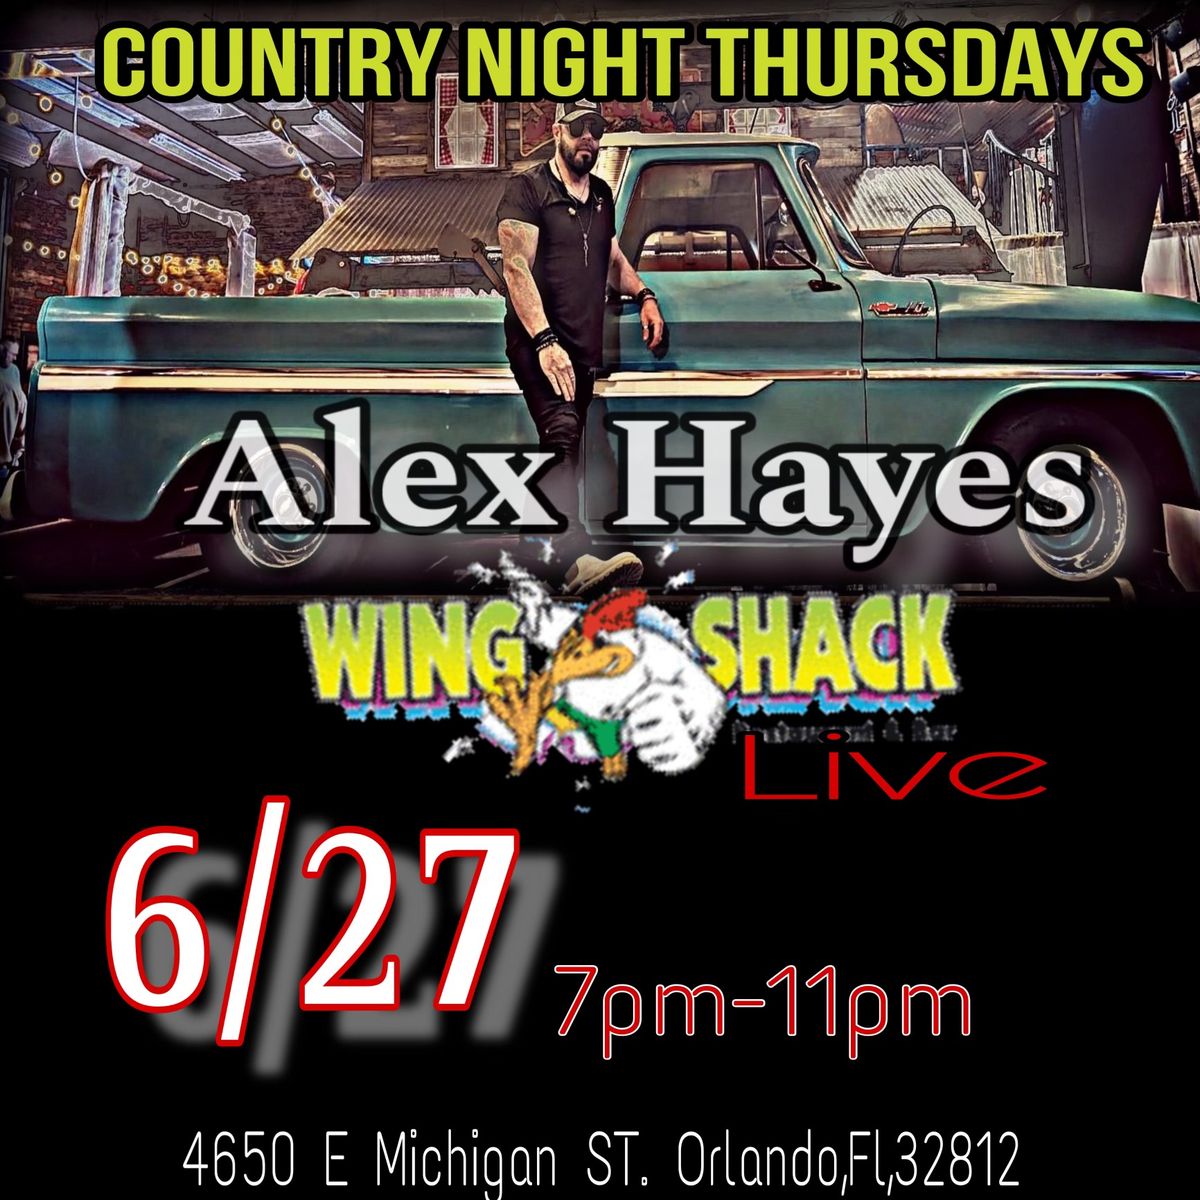 COUNTRY NIGHT with Alex Hayes comes to WingShack in Orlando 